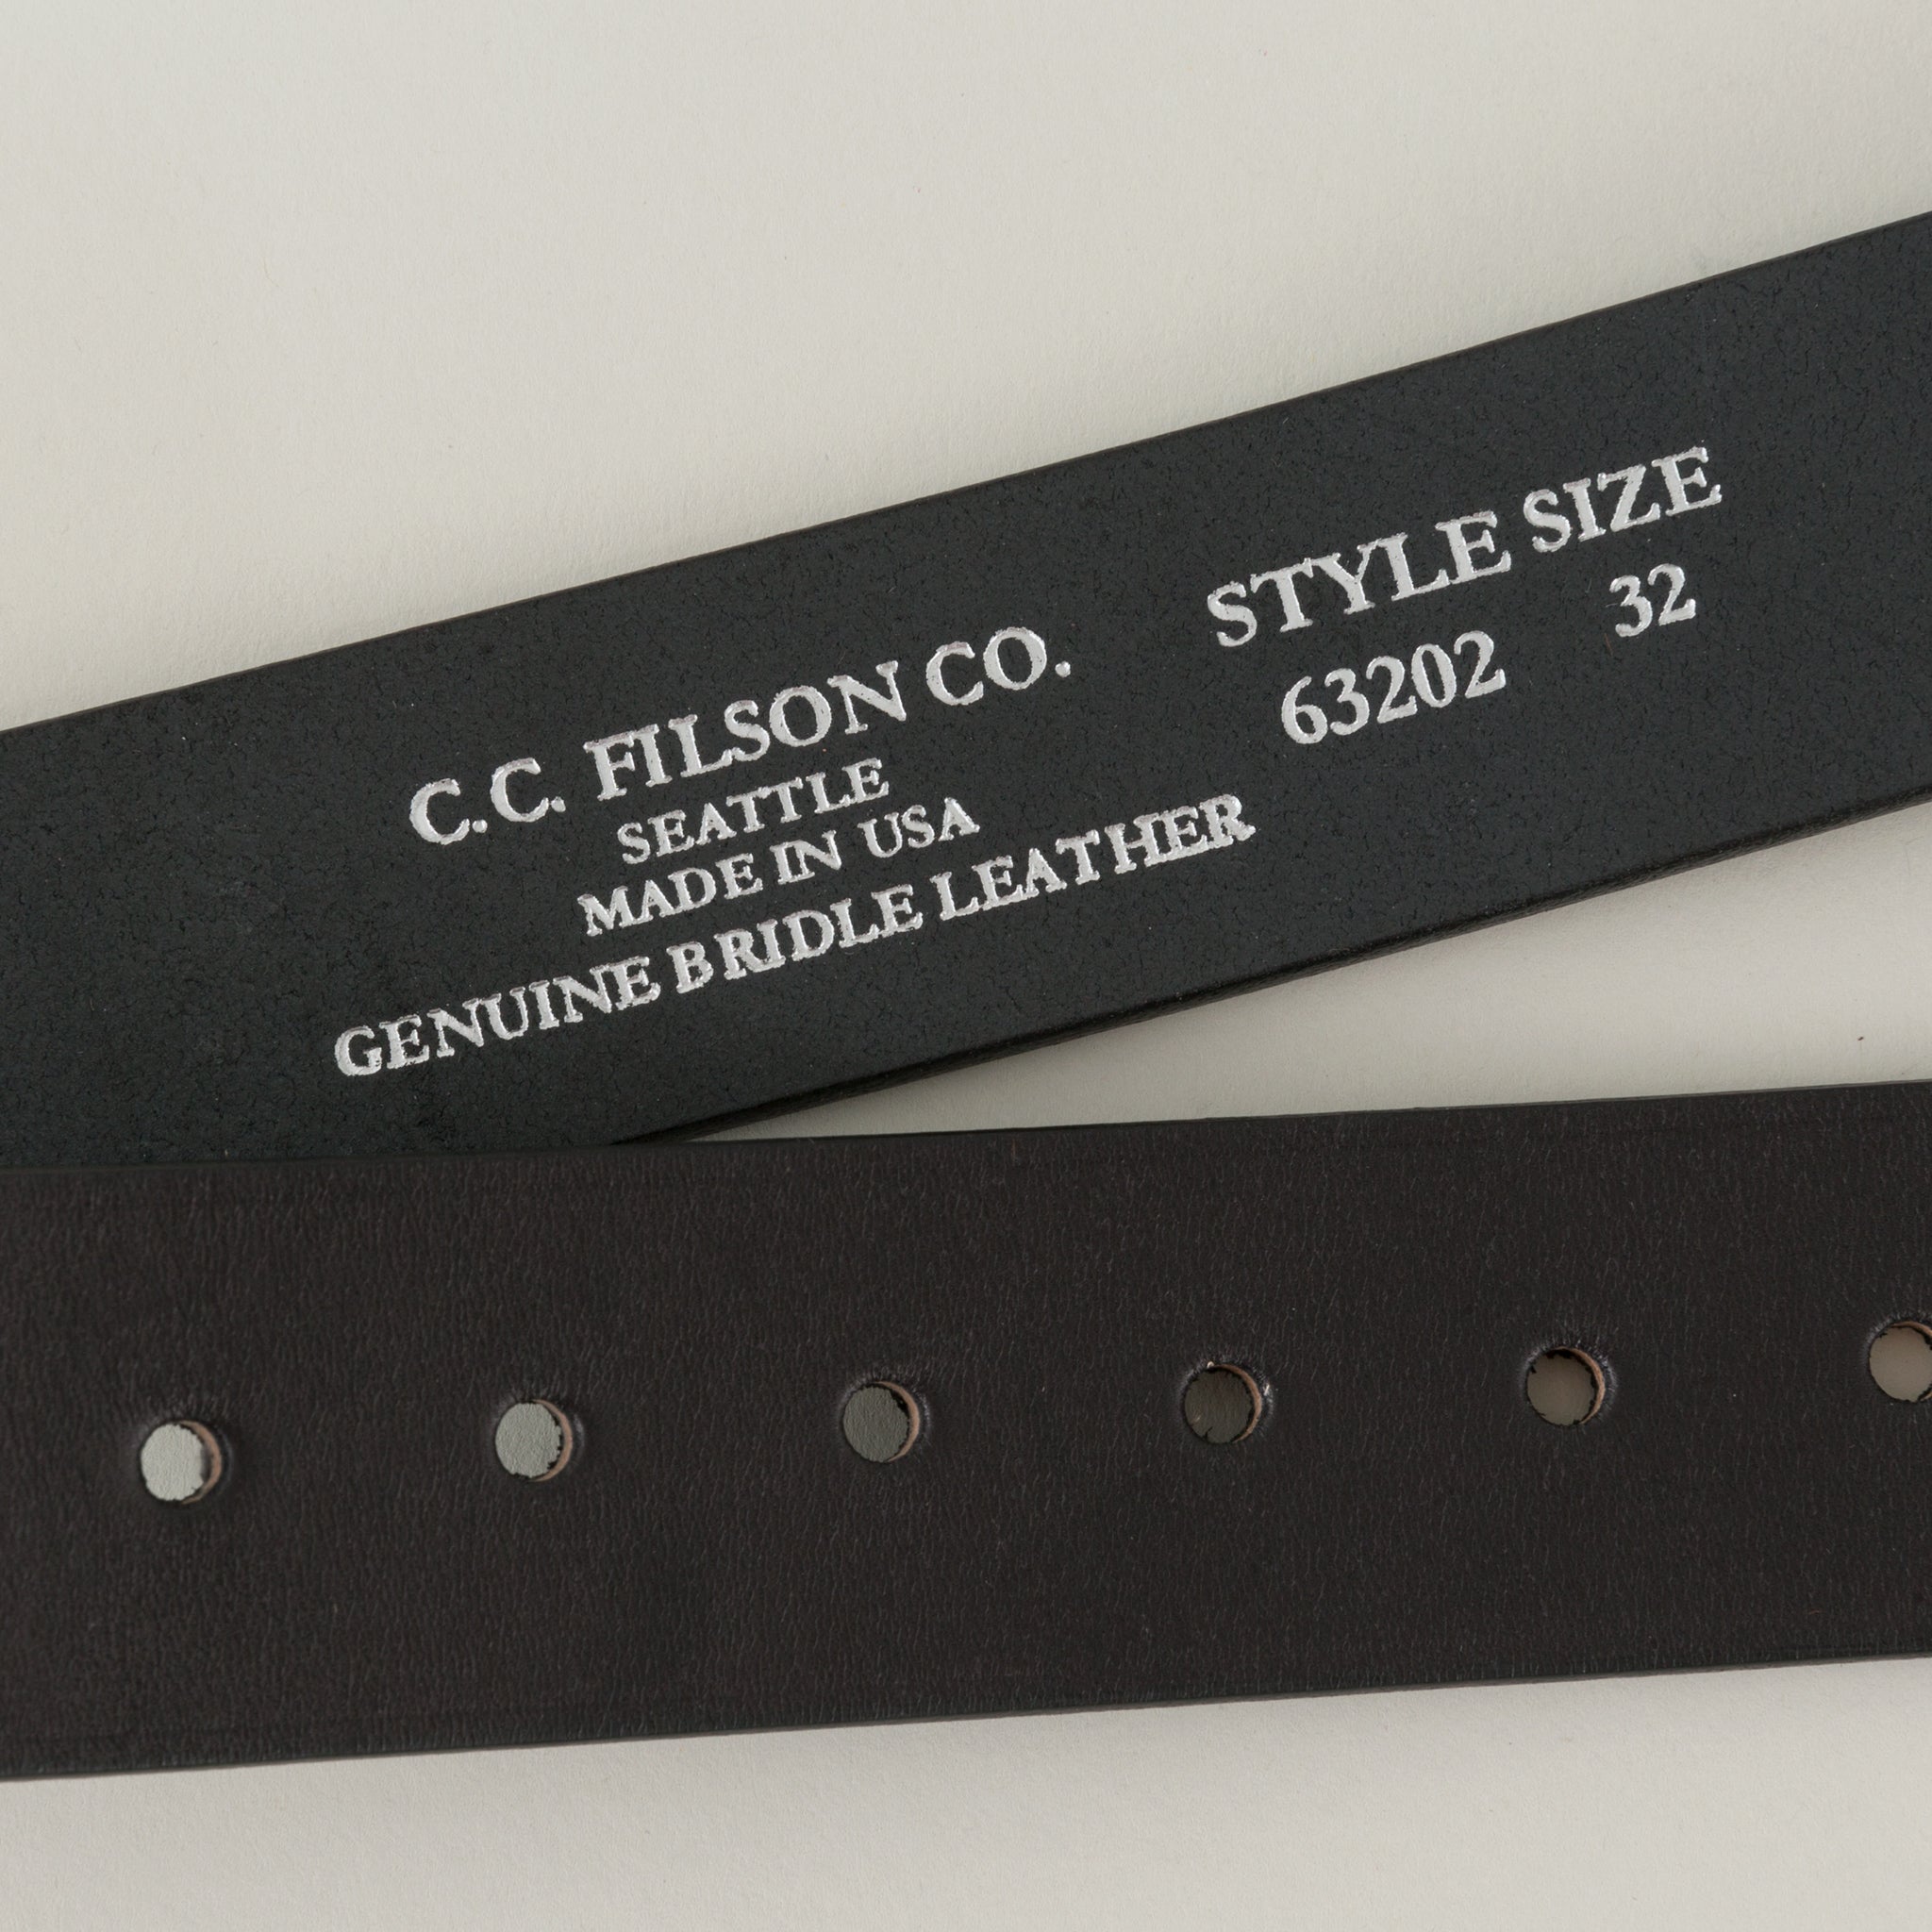 No. 5 Leather Cinch Belt - Italian Bridle Leather - Black Leather with Stainless Steel, Large - Fits Sizes 34 - 42